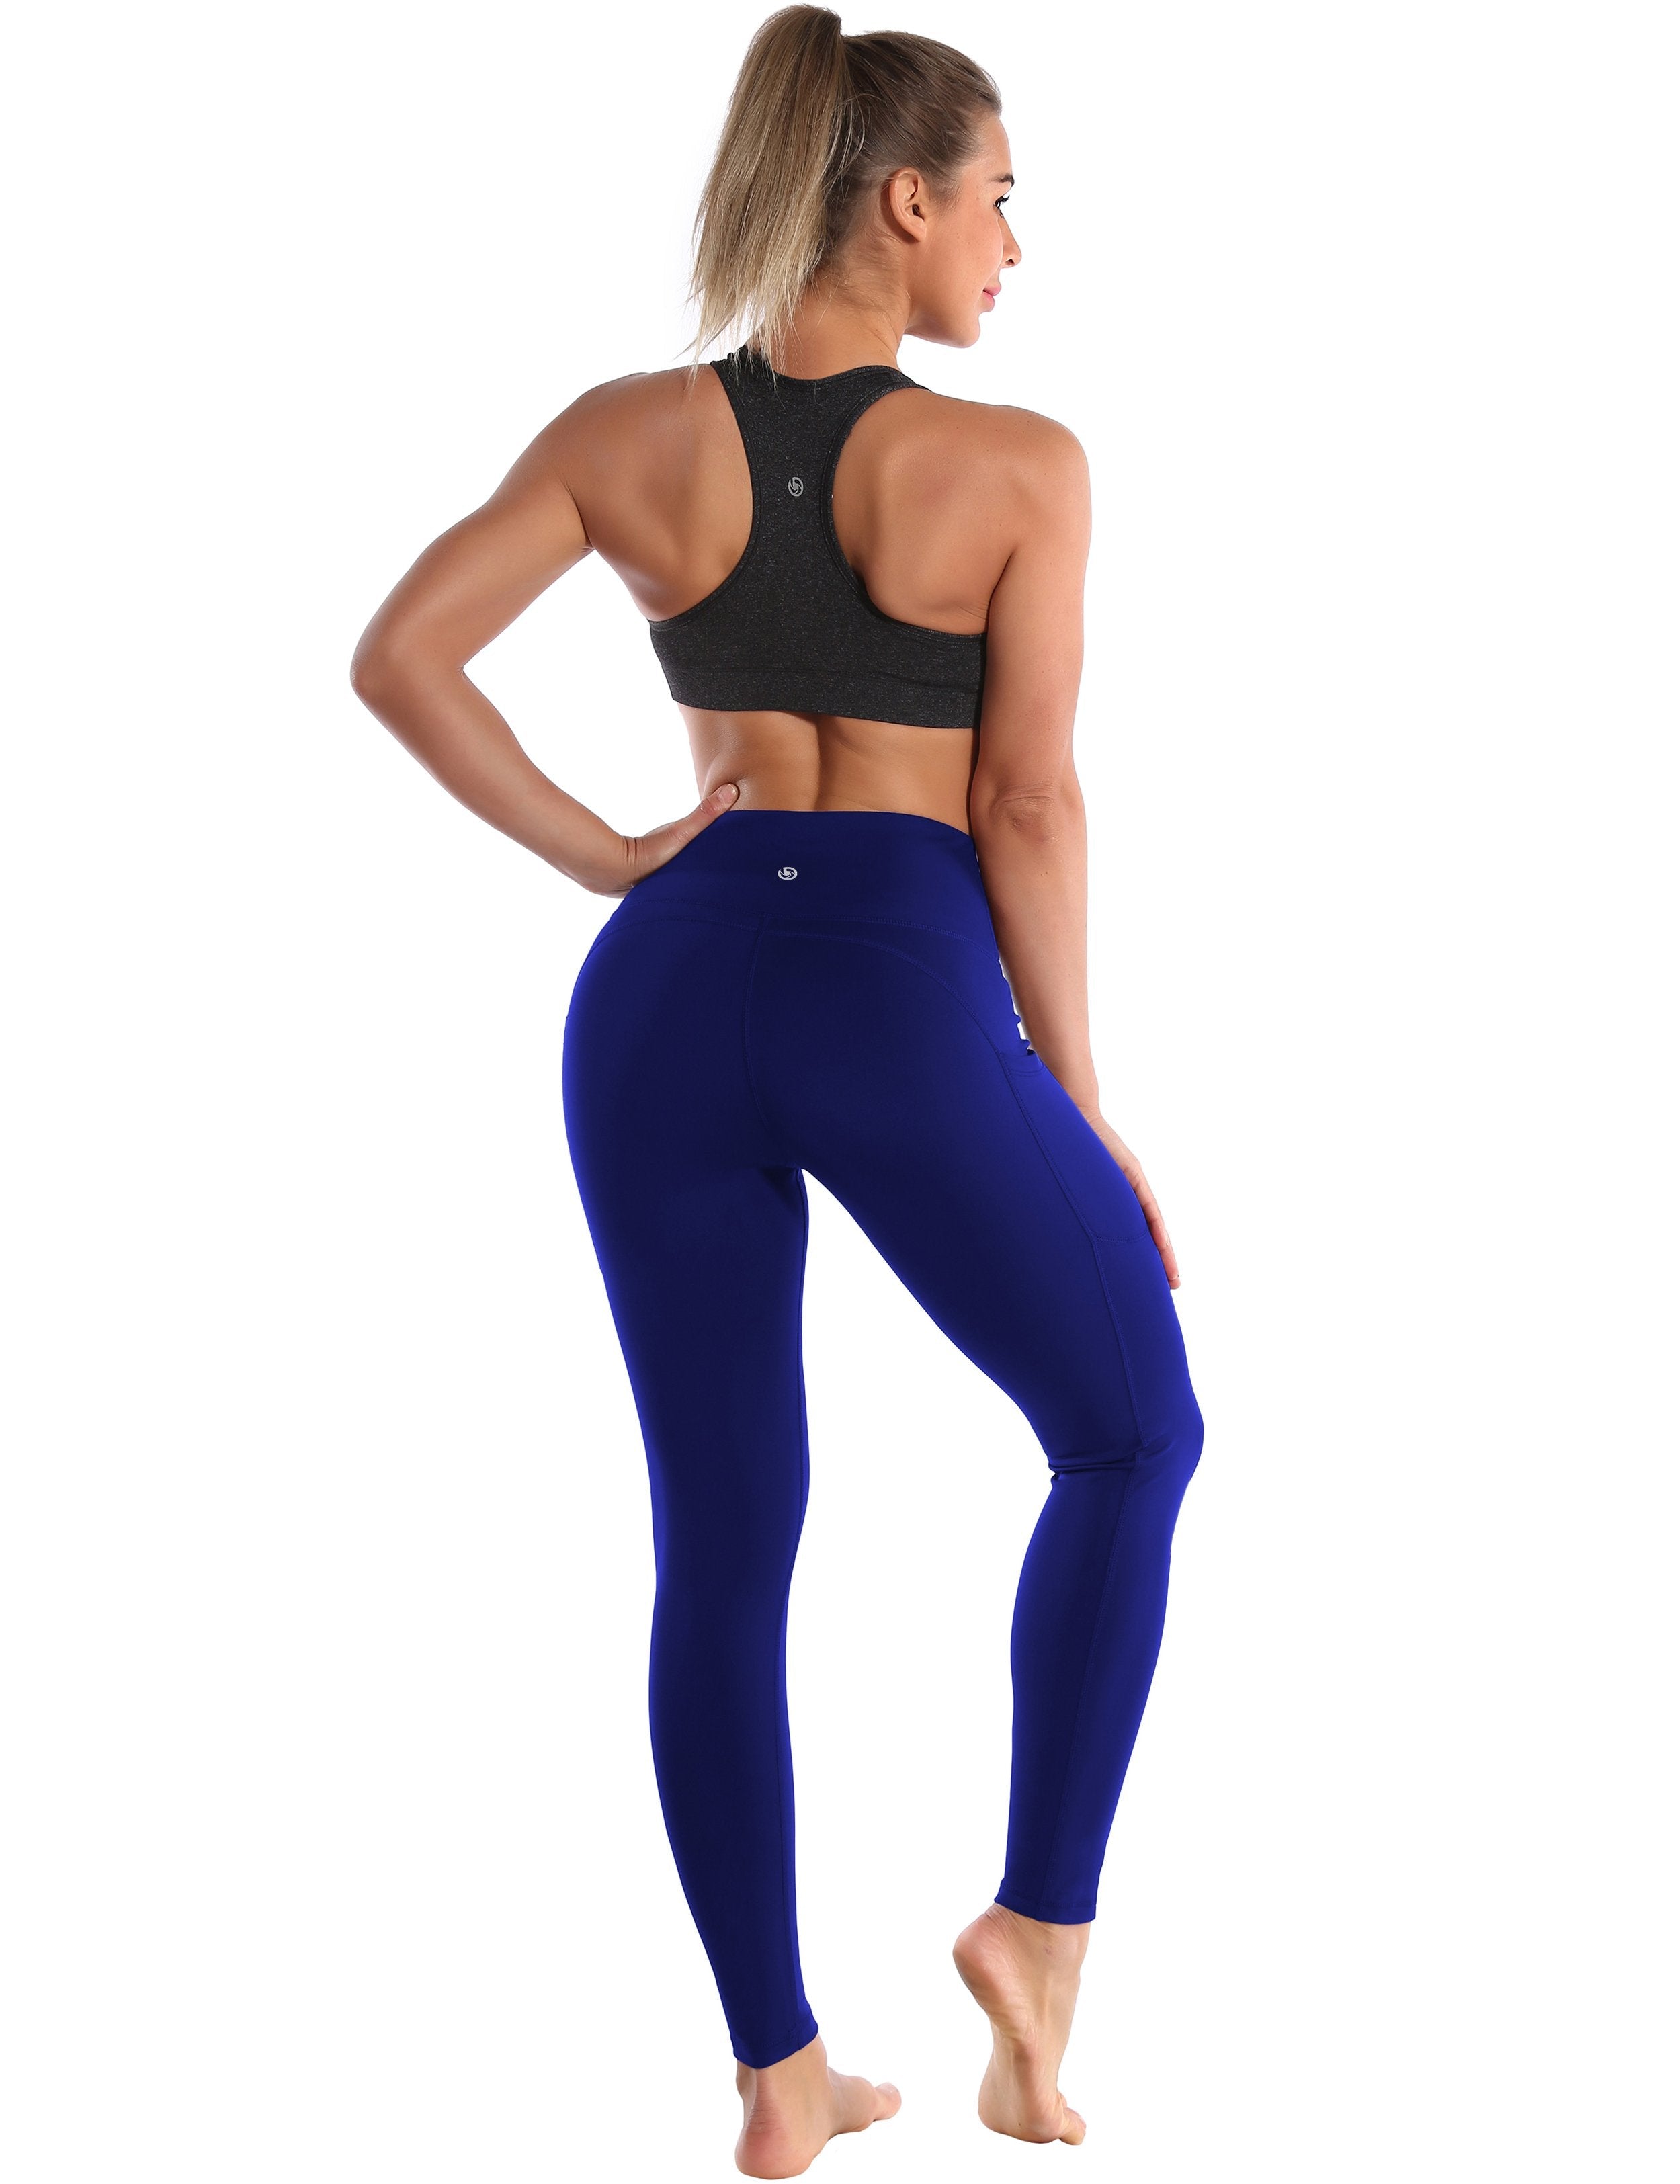 Hip Line Side Pockets Gym Pants navy Sexy Hip Line Side Pockets 75%Nylon/25%Spandex Fabric doesn't attract lint easily 4-way stretch No see-through Moisture-wicking Tummy control Inner pocket Two lengths